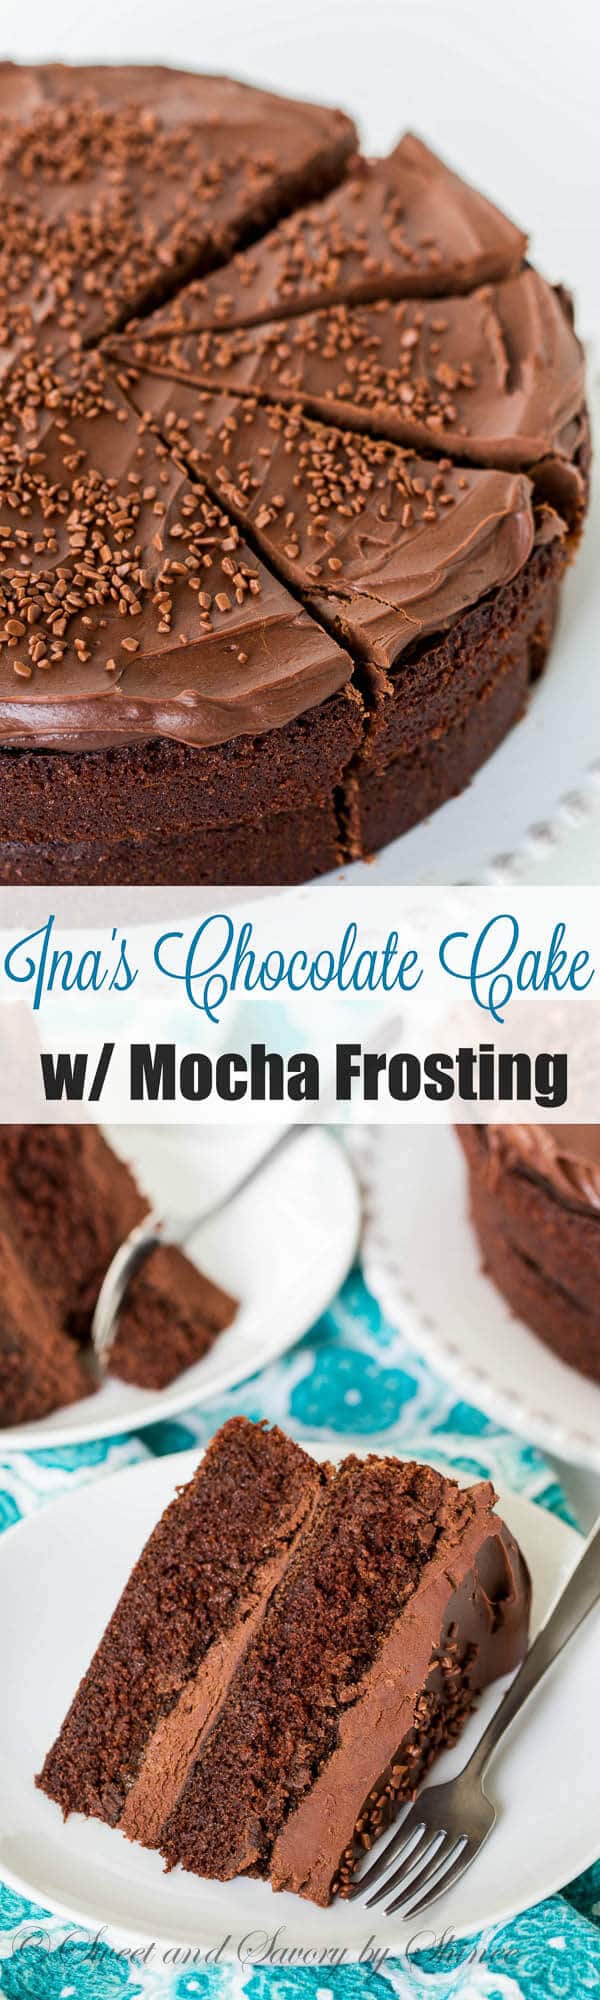 Ina's rich chocolate cake with generous mocha frosting is undeniably one of the best chocolate cakes out there! That mocha frosting is what really makes this cake!